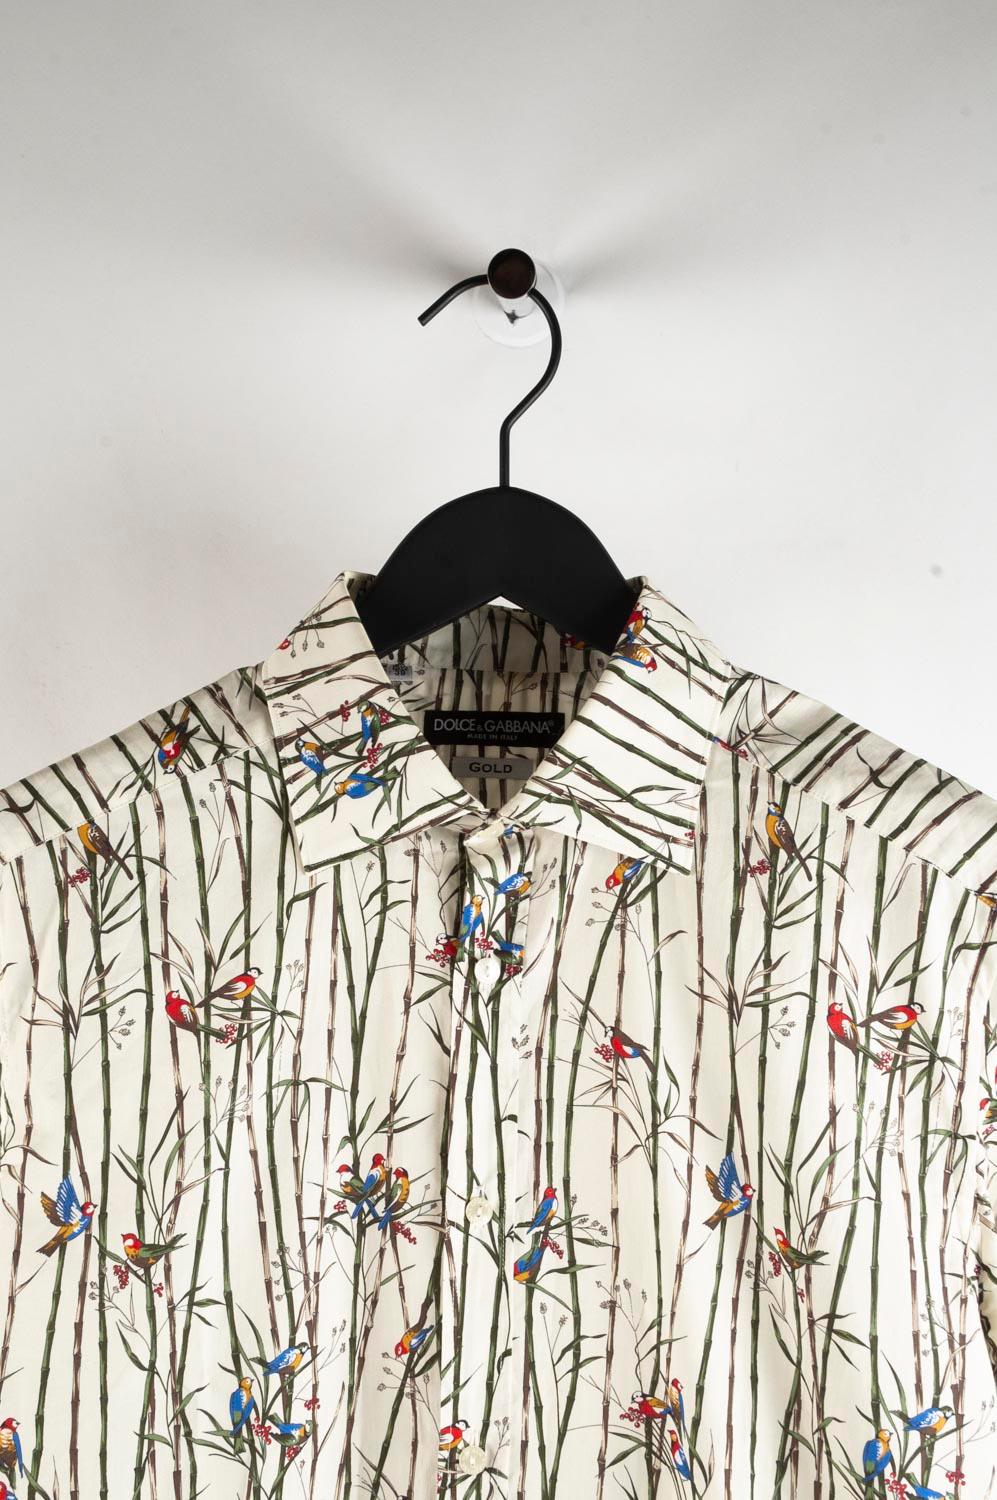 Item for sale is 100% genuine Dolce&Gabbana Mainline Gold Birds Print Men Shirt, S438
Color: Multicolor
(An actual color may a bit vary due to individual computer screen interpretation)
Material: cut care label it is 100proc. cotton.
Tag